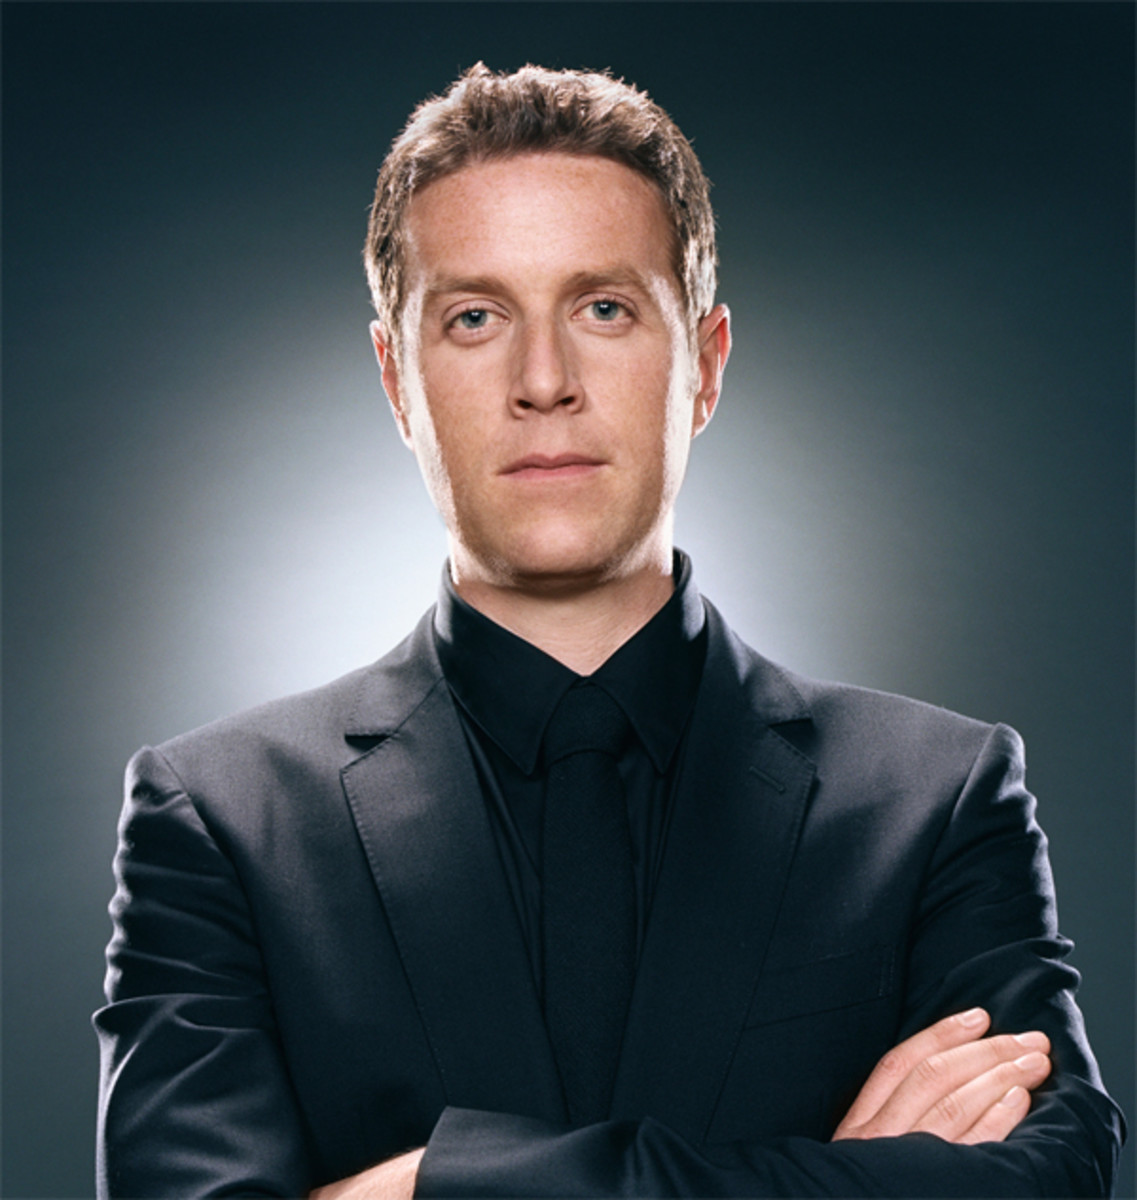 Geoff Keighley's The Game Awards returns as a hybrid online show and  physical event on Dec. 8